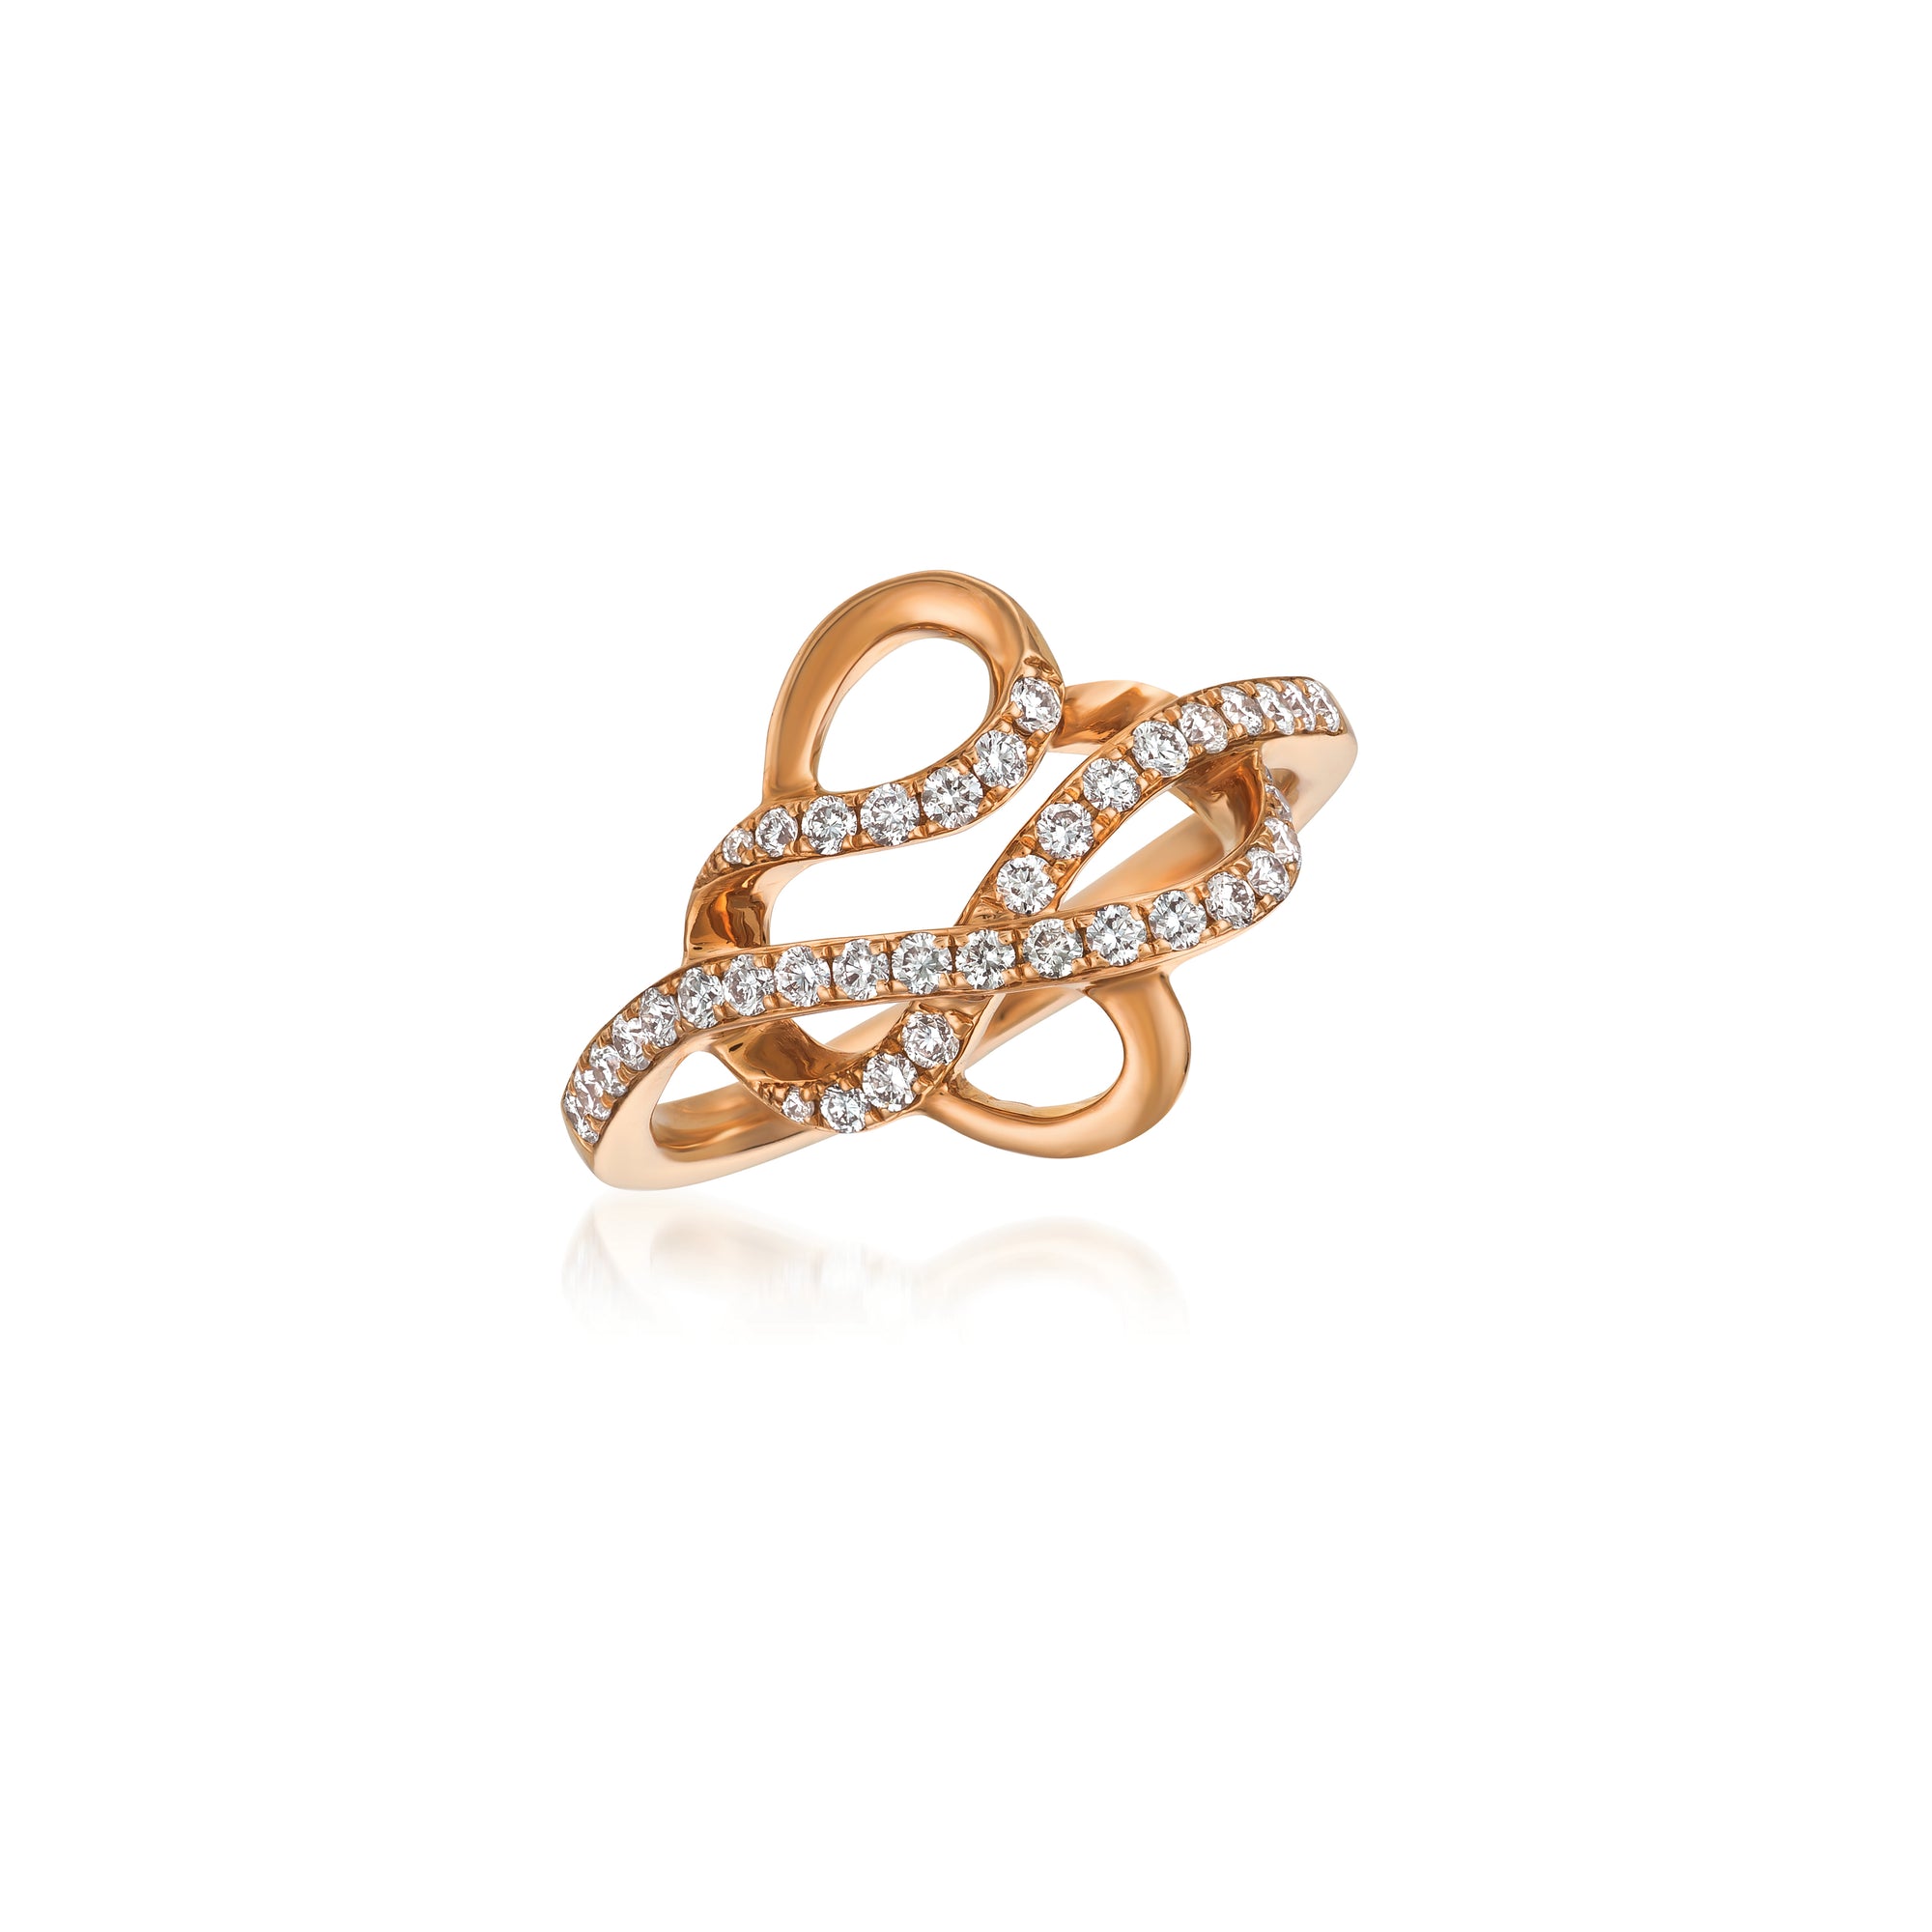 14Kt Strawberry Gold And Diamond Ring, Diamonds Total Weight 0.38Cts